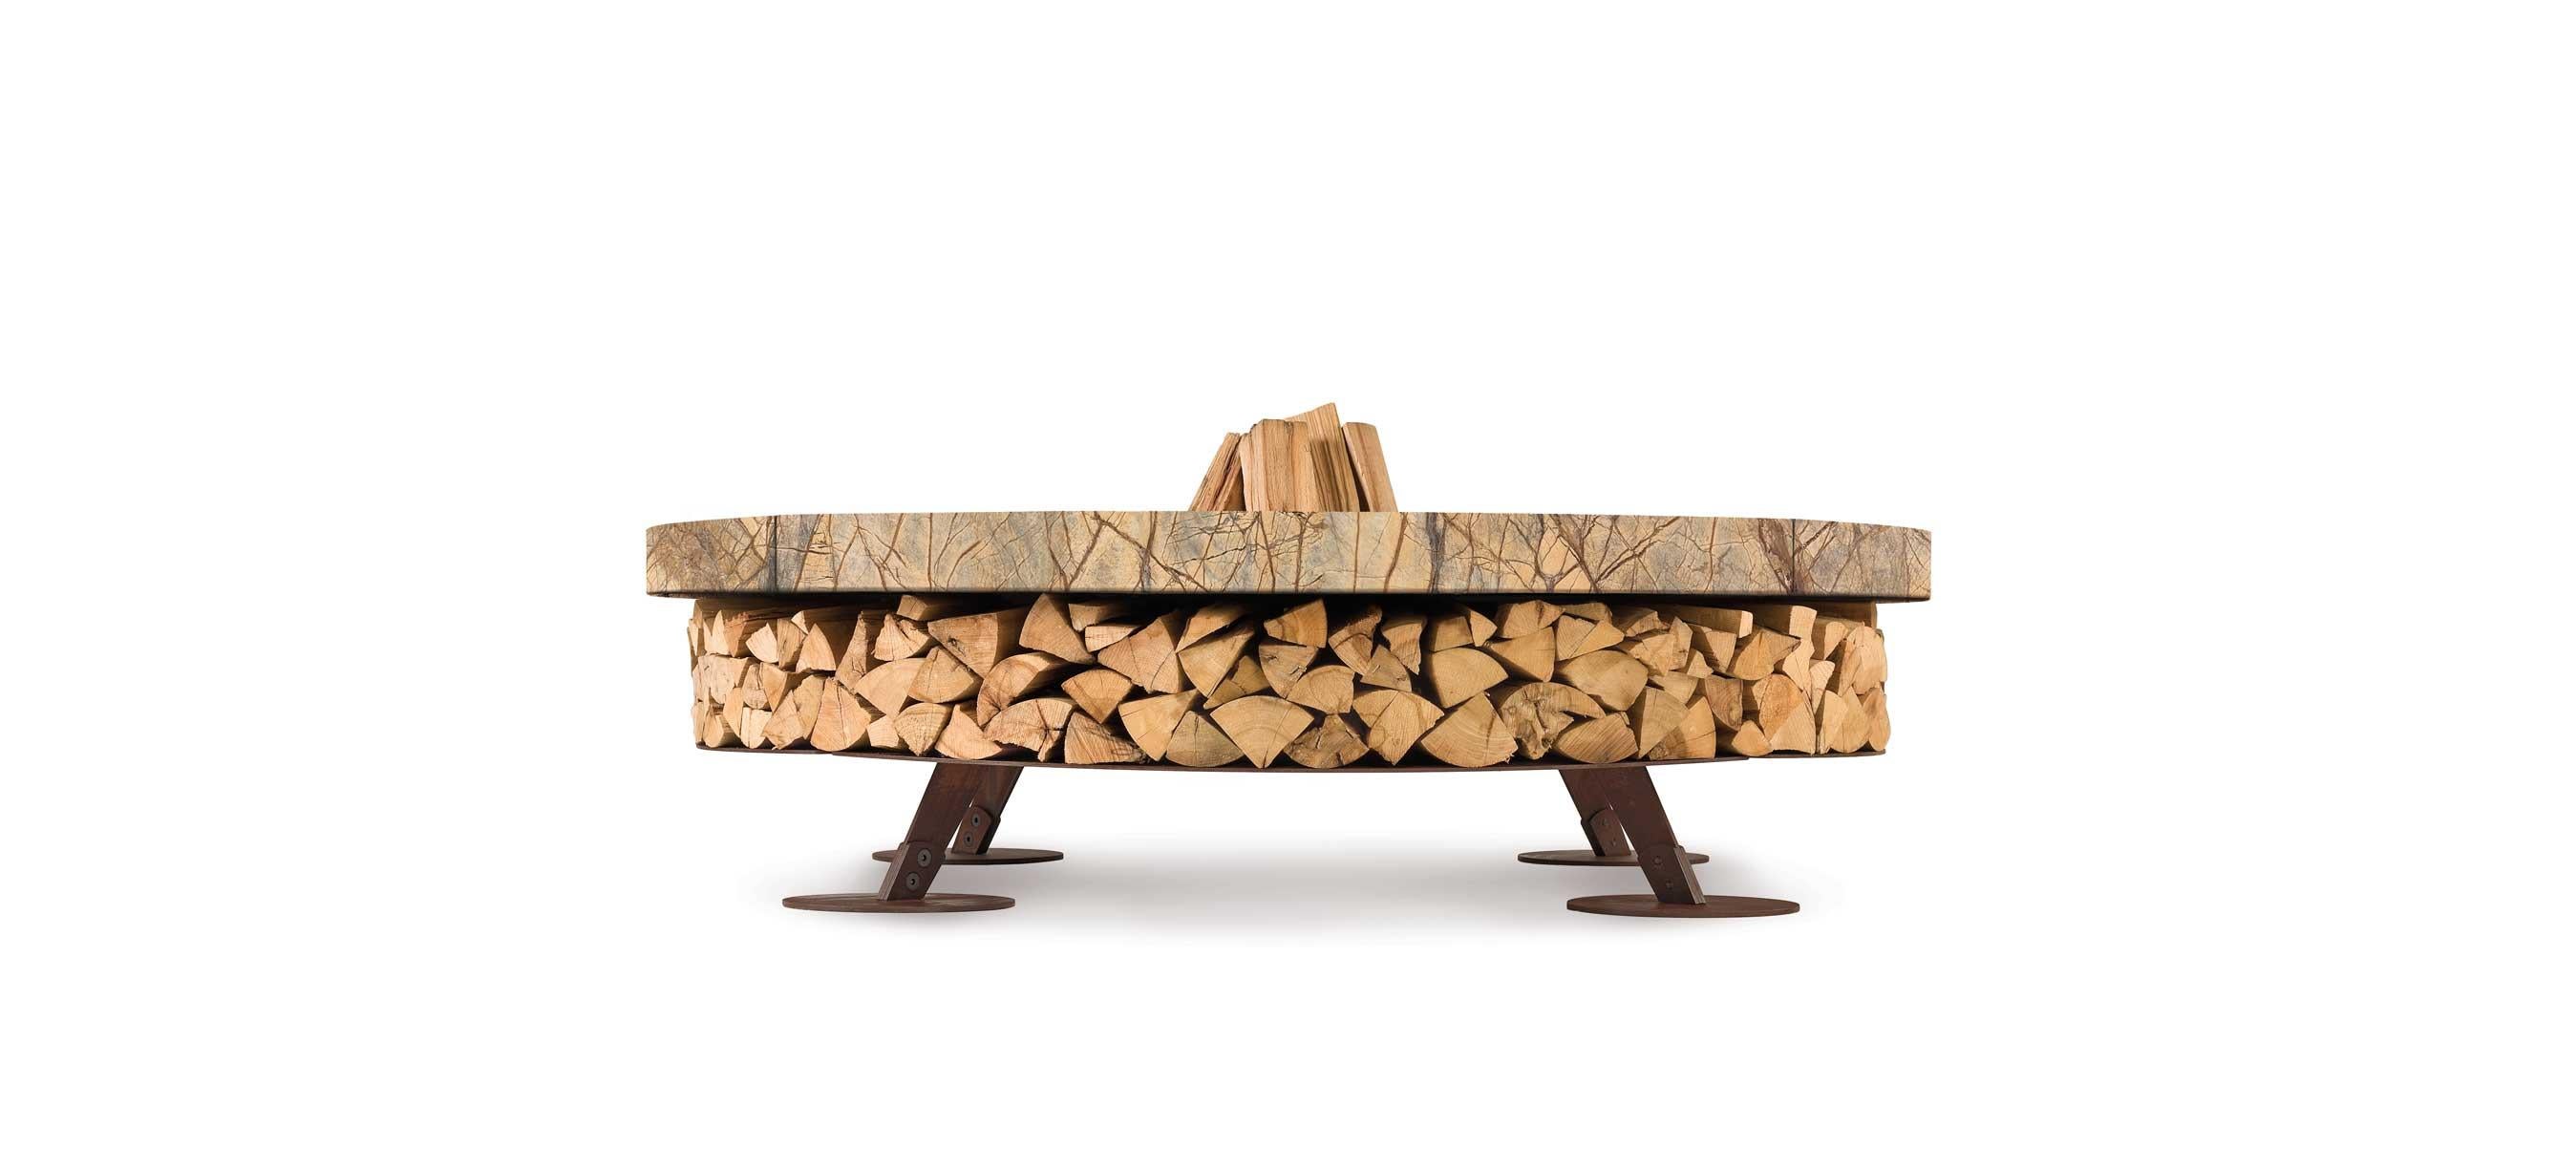 Ercole small rain forest brown marble fire pit by AK47 design

Rain forest brown marble fire pit Ø1500 mm.
Ercole is a outdoor wood-burning fire pit.
It is born by the union of two raw materials – the steel as a structural element and the marble